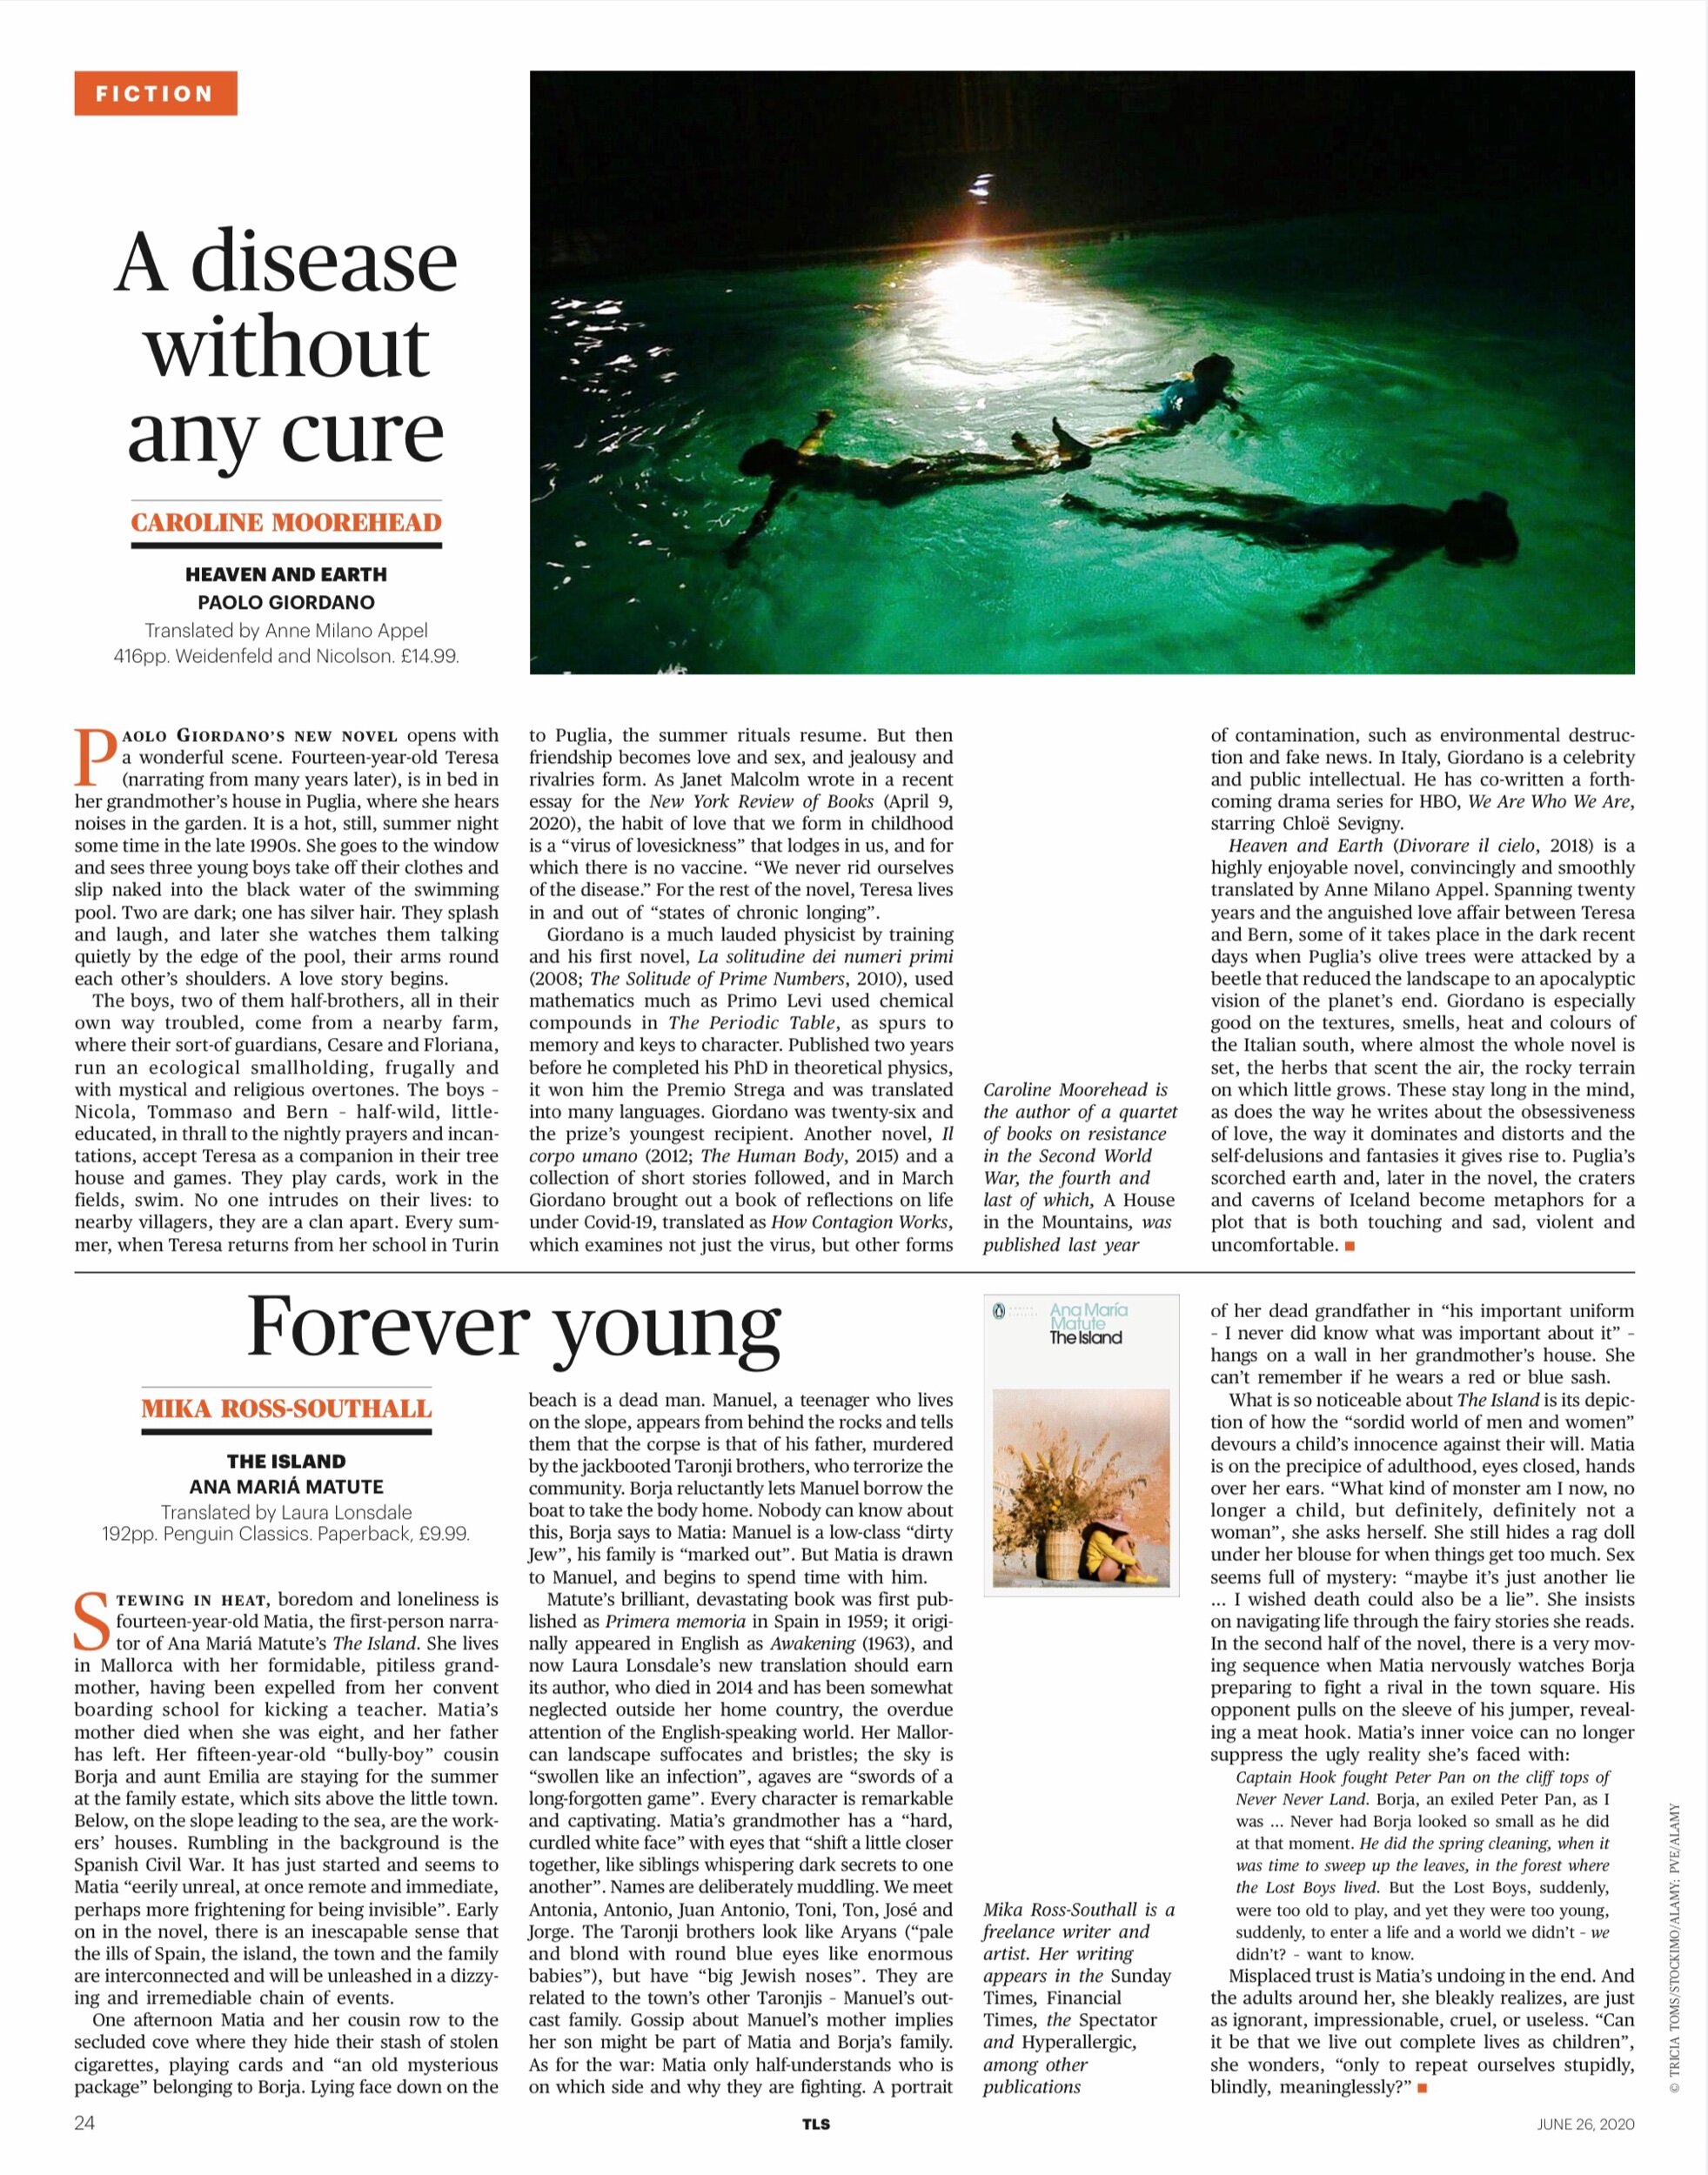 The Times Literary Supplement, 26 June 2020. "Forever Young"